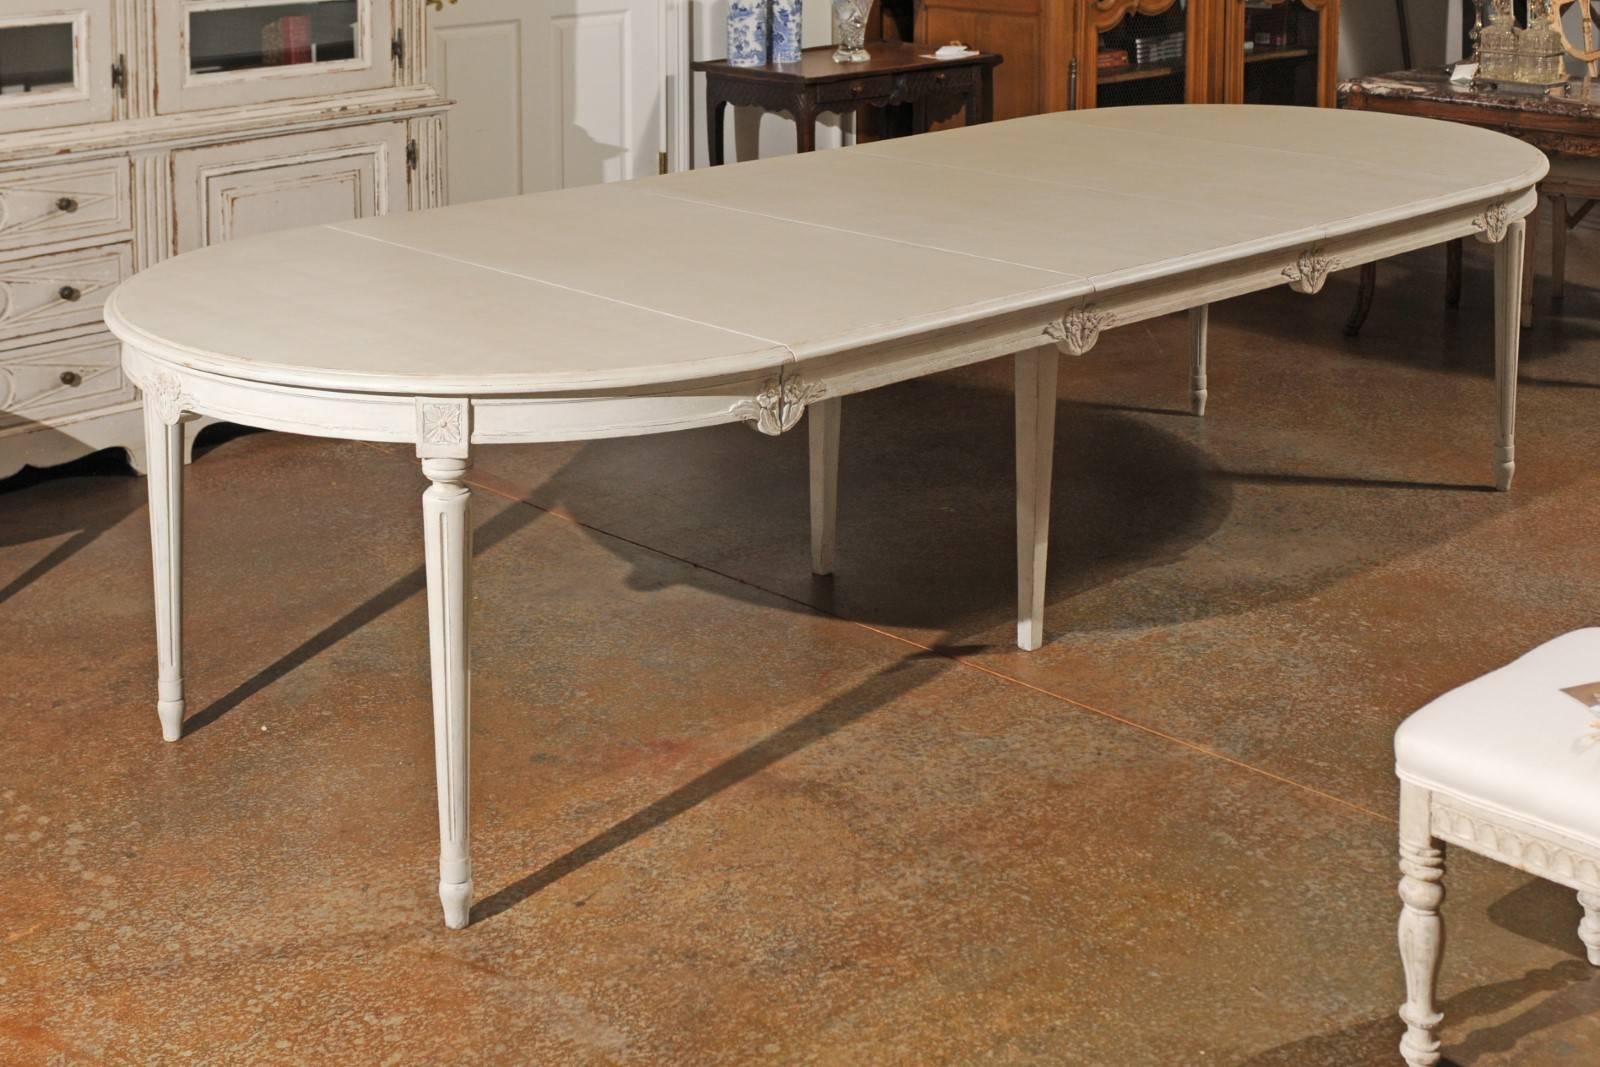 A Swedish oval neoclassical style painted extension dining room table from the early 20th century with three leaves and fluted legs. This exquisite Swedish long dining room table features an oval top, comprising three removable leaves that extend